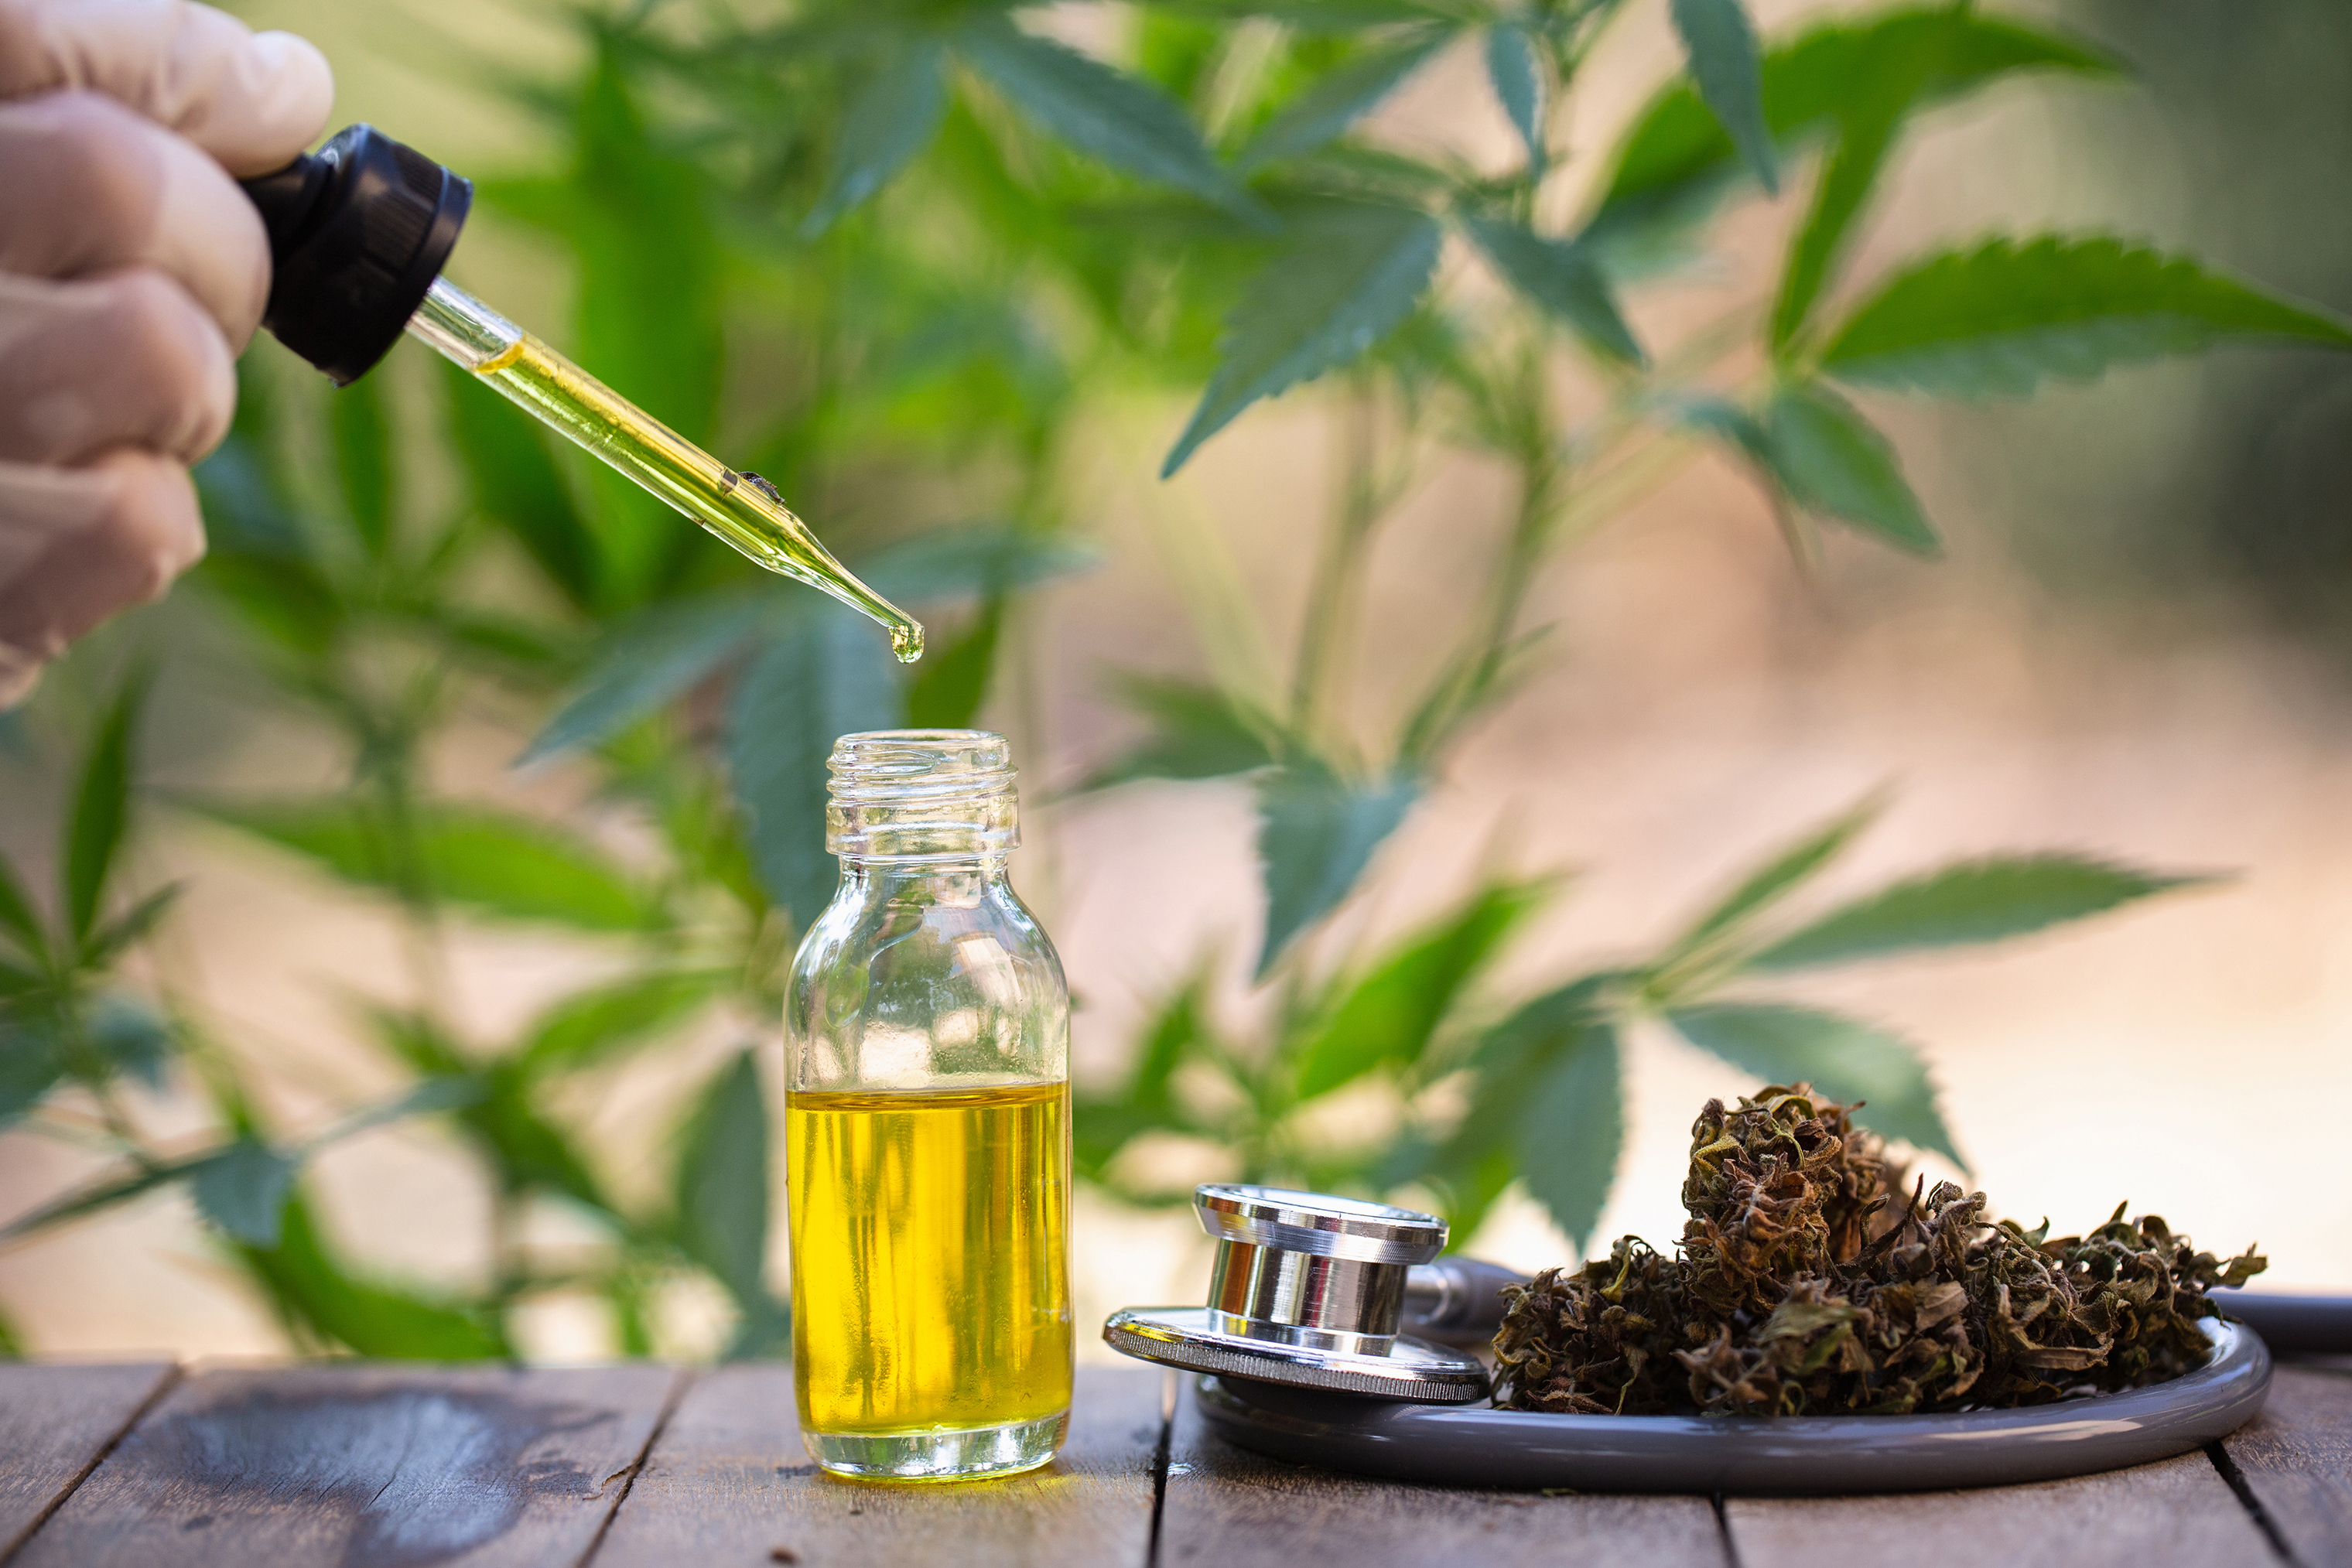 How To Get Fda Approved Cbd Oil In South Dakota - Cbd|Oil|Cannabidiol|Products|View|Abstract|Effects|Hemp|Cannabis|Product|Thc|Pain|People|Health|Body|Plant|Cannabinoids|Medications|Oils|Drug|Benefits|System|Study|Marijuana|Anxiety|Side|Research|Effect|Liver|Quality|Treatment|Studies|Epilepsy|Symptoms|Gummies|Compounds|Dose|Time|Inflammation|Bottle|Cbd Oil|View Abstract|Side Effects|Cbd Products|Endocannabinoid System|Multiple Sclerosis|Cbd Oils|Cbd Gummies|Cannabis Plant|Hemp Oil|Cbd Product|Hemp Plant|United States|Cytochrome P450|Many People|Chronic Pain|Nuleaf Naturals|Royal Cbd|Full-Spectrum Cbd Oil|Drug Administration|Cbd Oil Products|Medical Marijuana|Drug Test|Heavy Metals|Clinical Trial|Clinical Trials|Cbd Oil Side|Rating Highlights|Wide Variety|Animal Studies